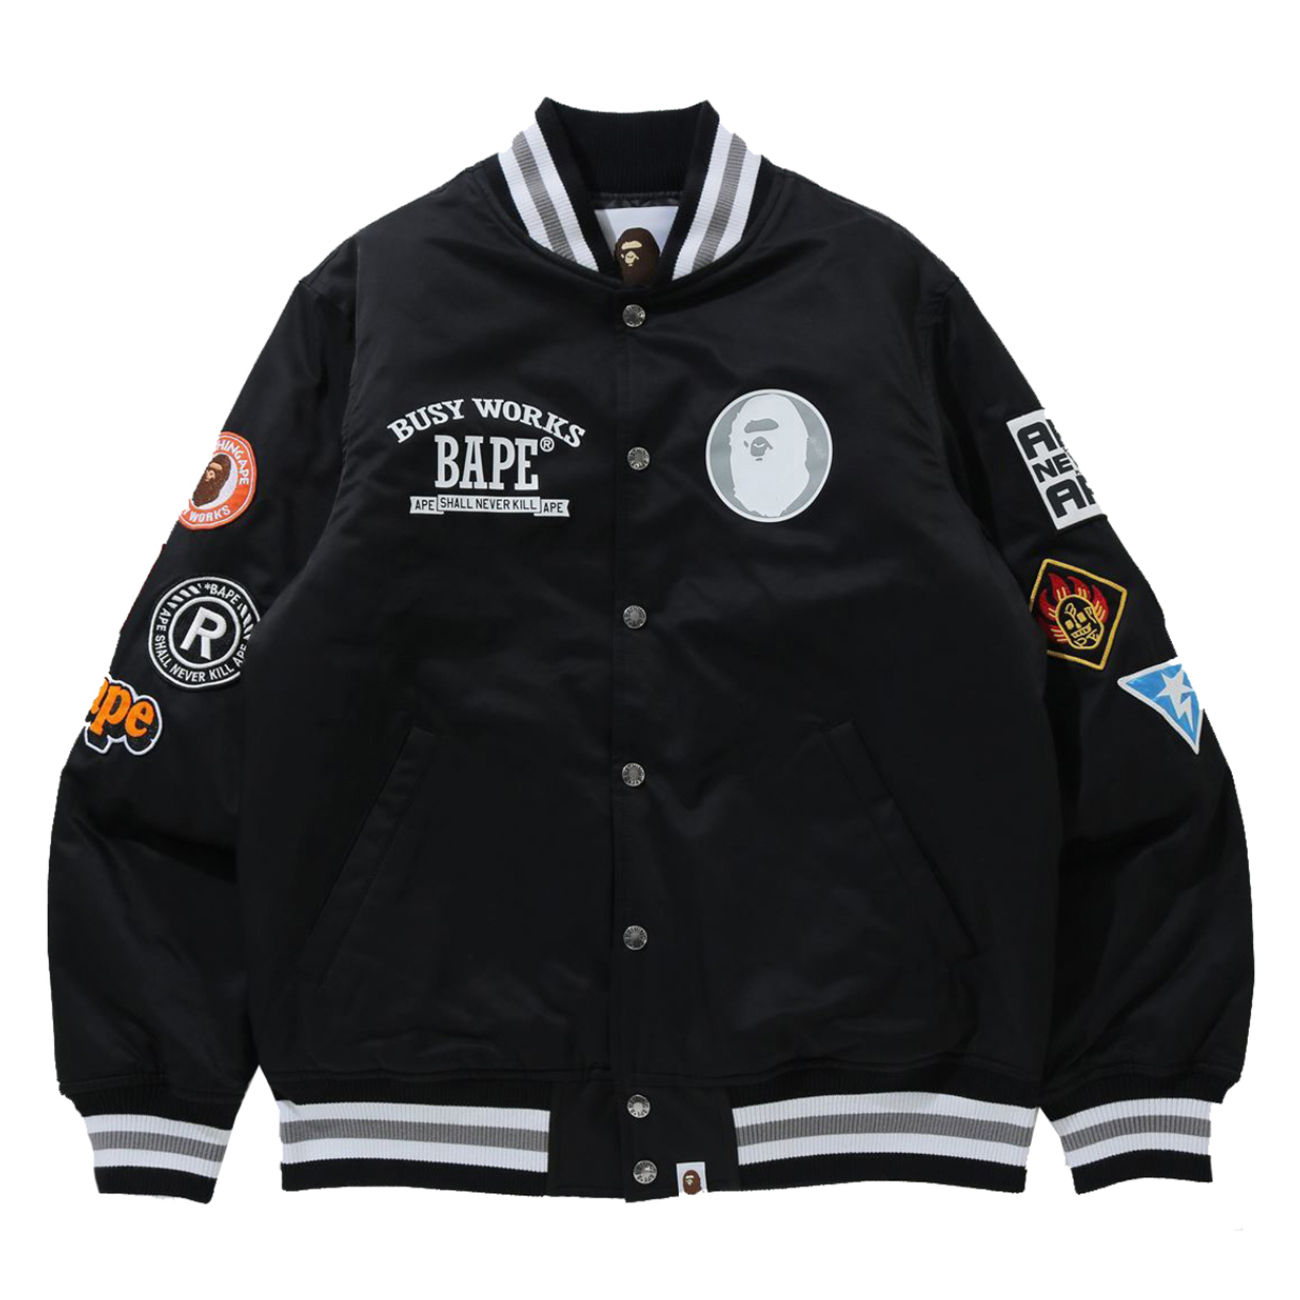 Varsity Jackets A Classic Icon of American Culture